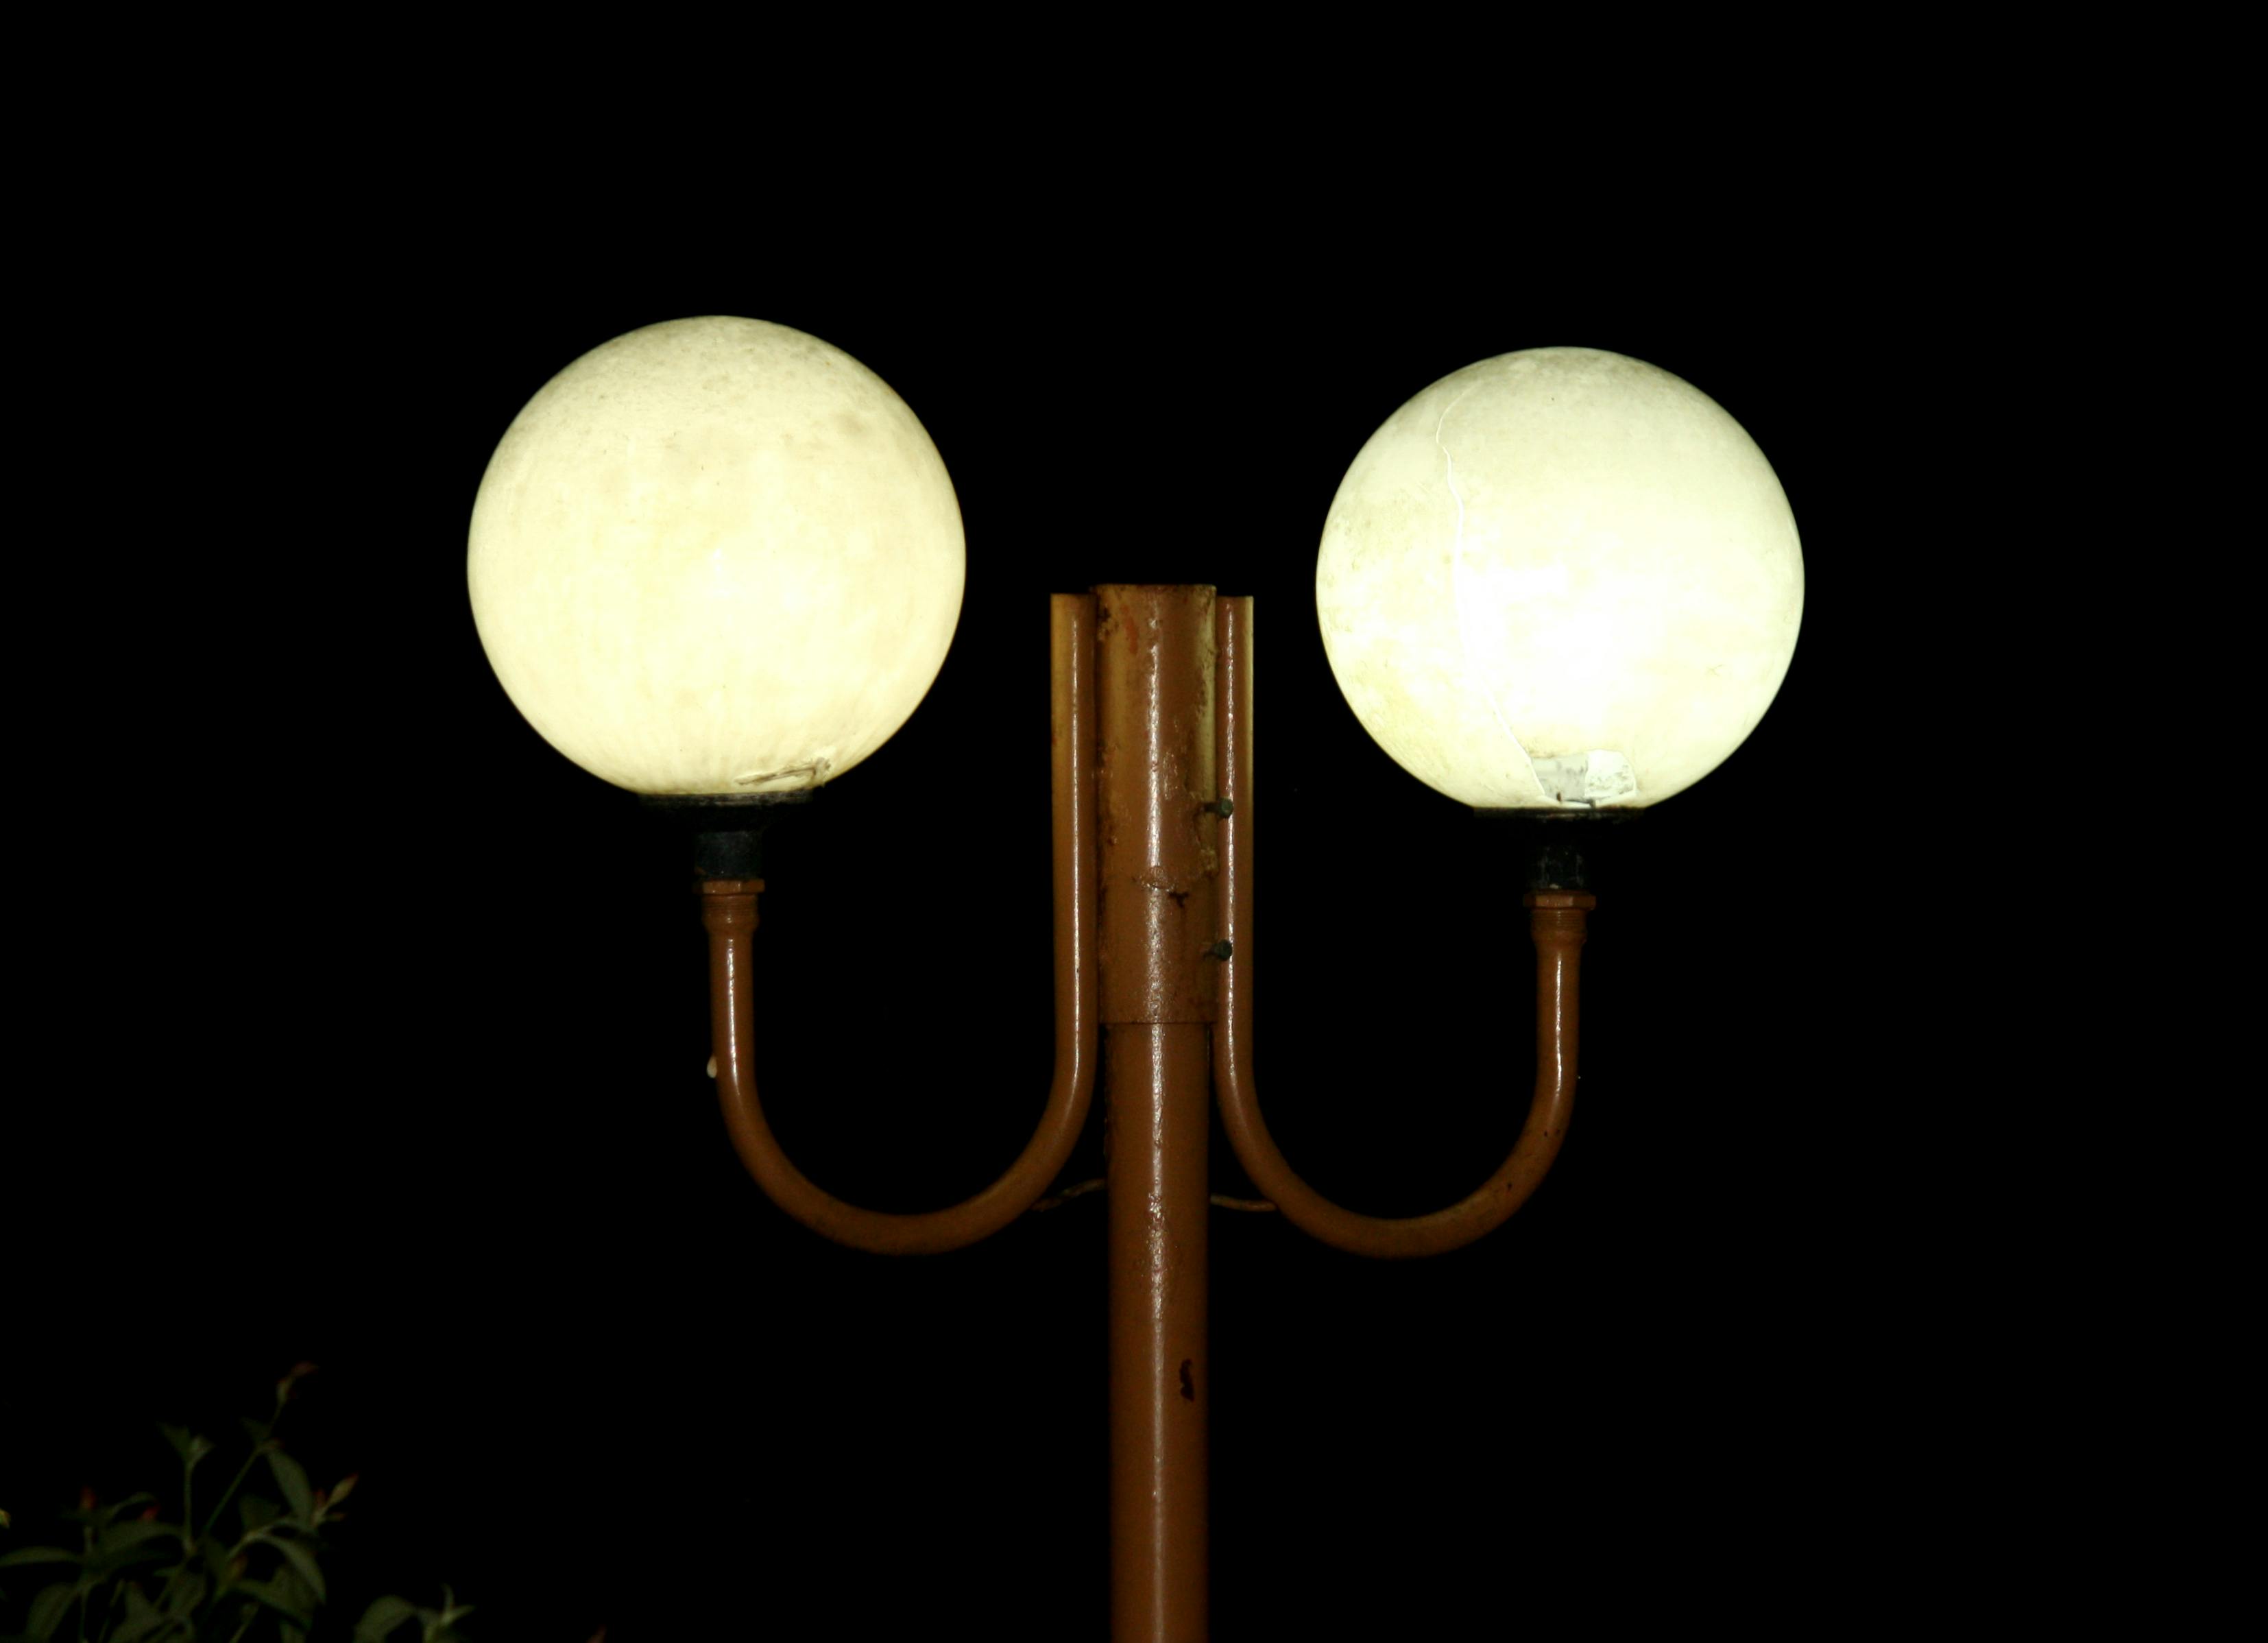 Free stock photo of lamp posts, street lamps